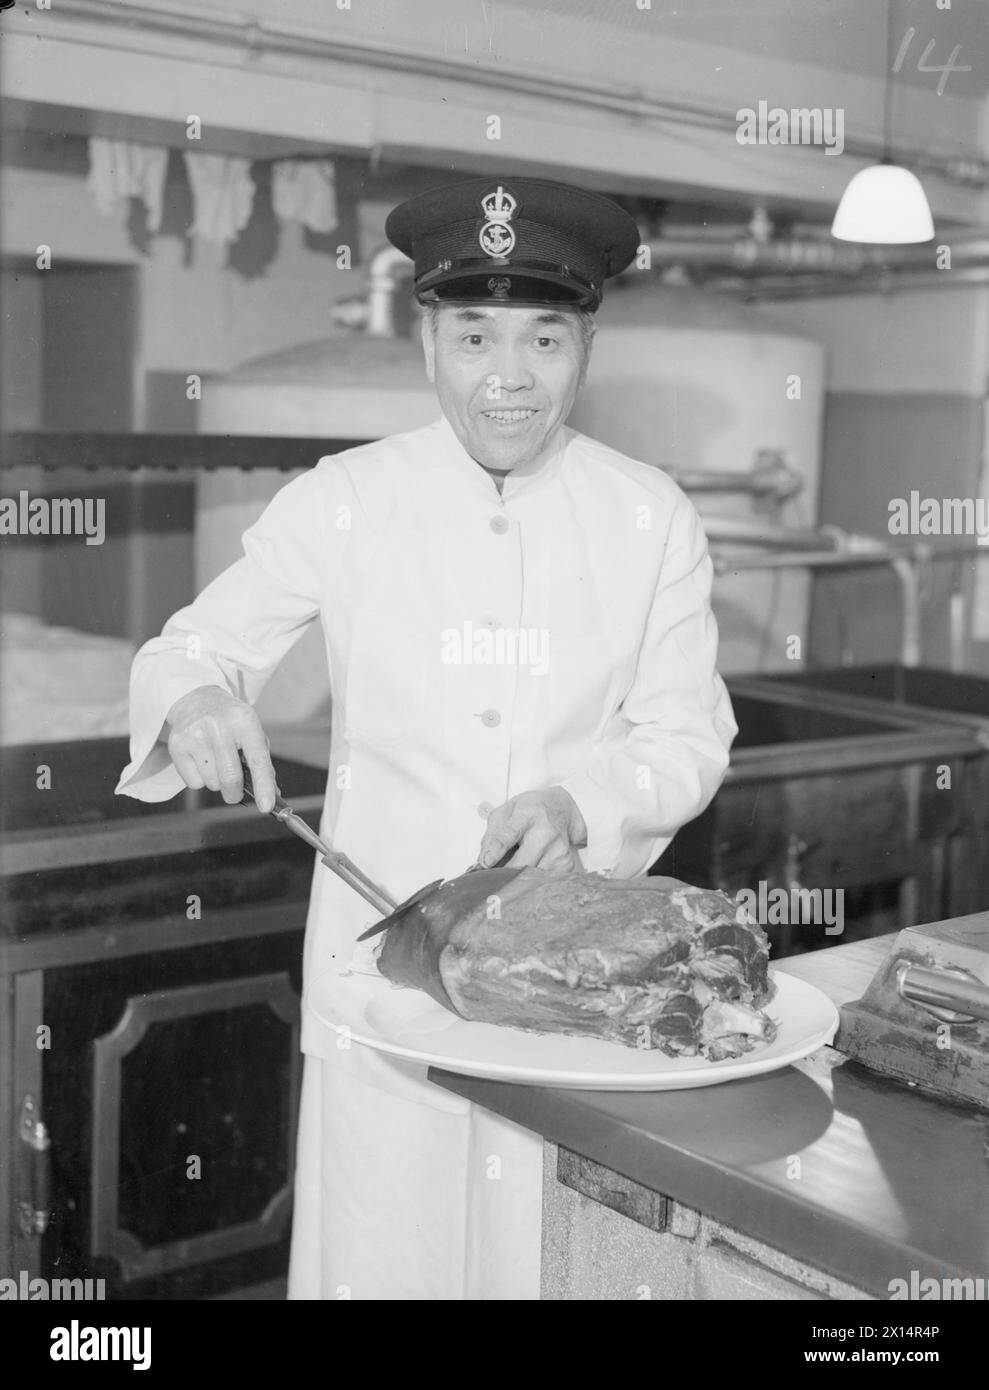 SERVED IN 29 SHIPS. 16 MAY 1944, HMS DINOSAUR, COMBINED OPERATIONS BASE, TROON. 65 YEAR OLD PETTY OFFICER COOK SEI TAN, OF HONG KONG, NOW CHIEF COOK IN THE KITCHEN AT HMS DINOSAUR, AND IN CHARGE OF 22 OTHER COOKS. HE JOINED THE NAVY IN 1904 AND HAS SERVED IN 29 SHIPS. - Petty Officer Cook Sei Tan carving a ham in the galley Stock Photo